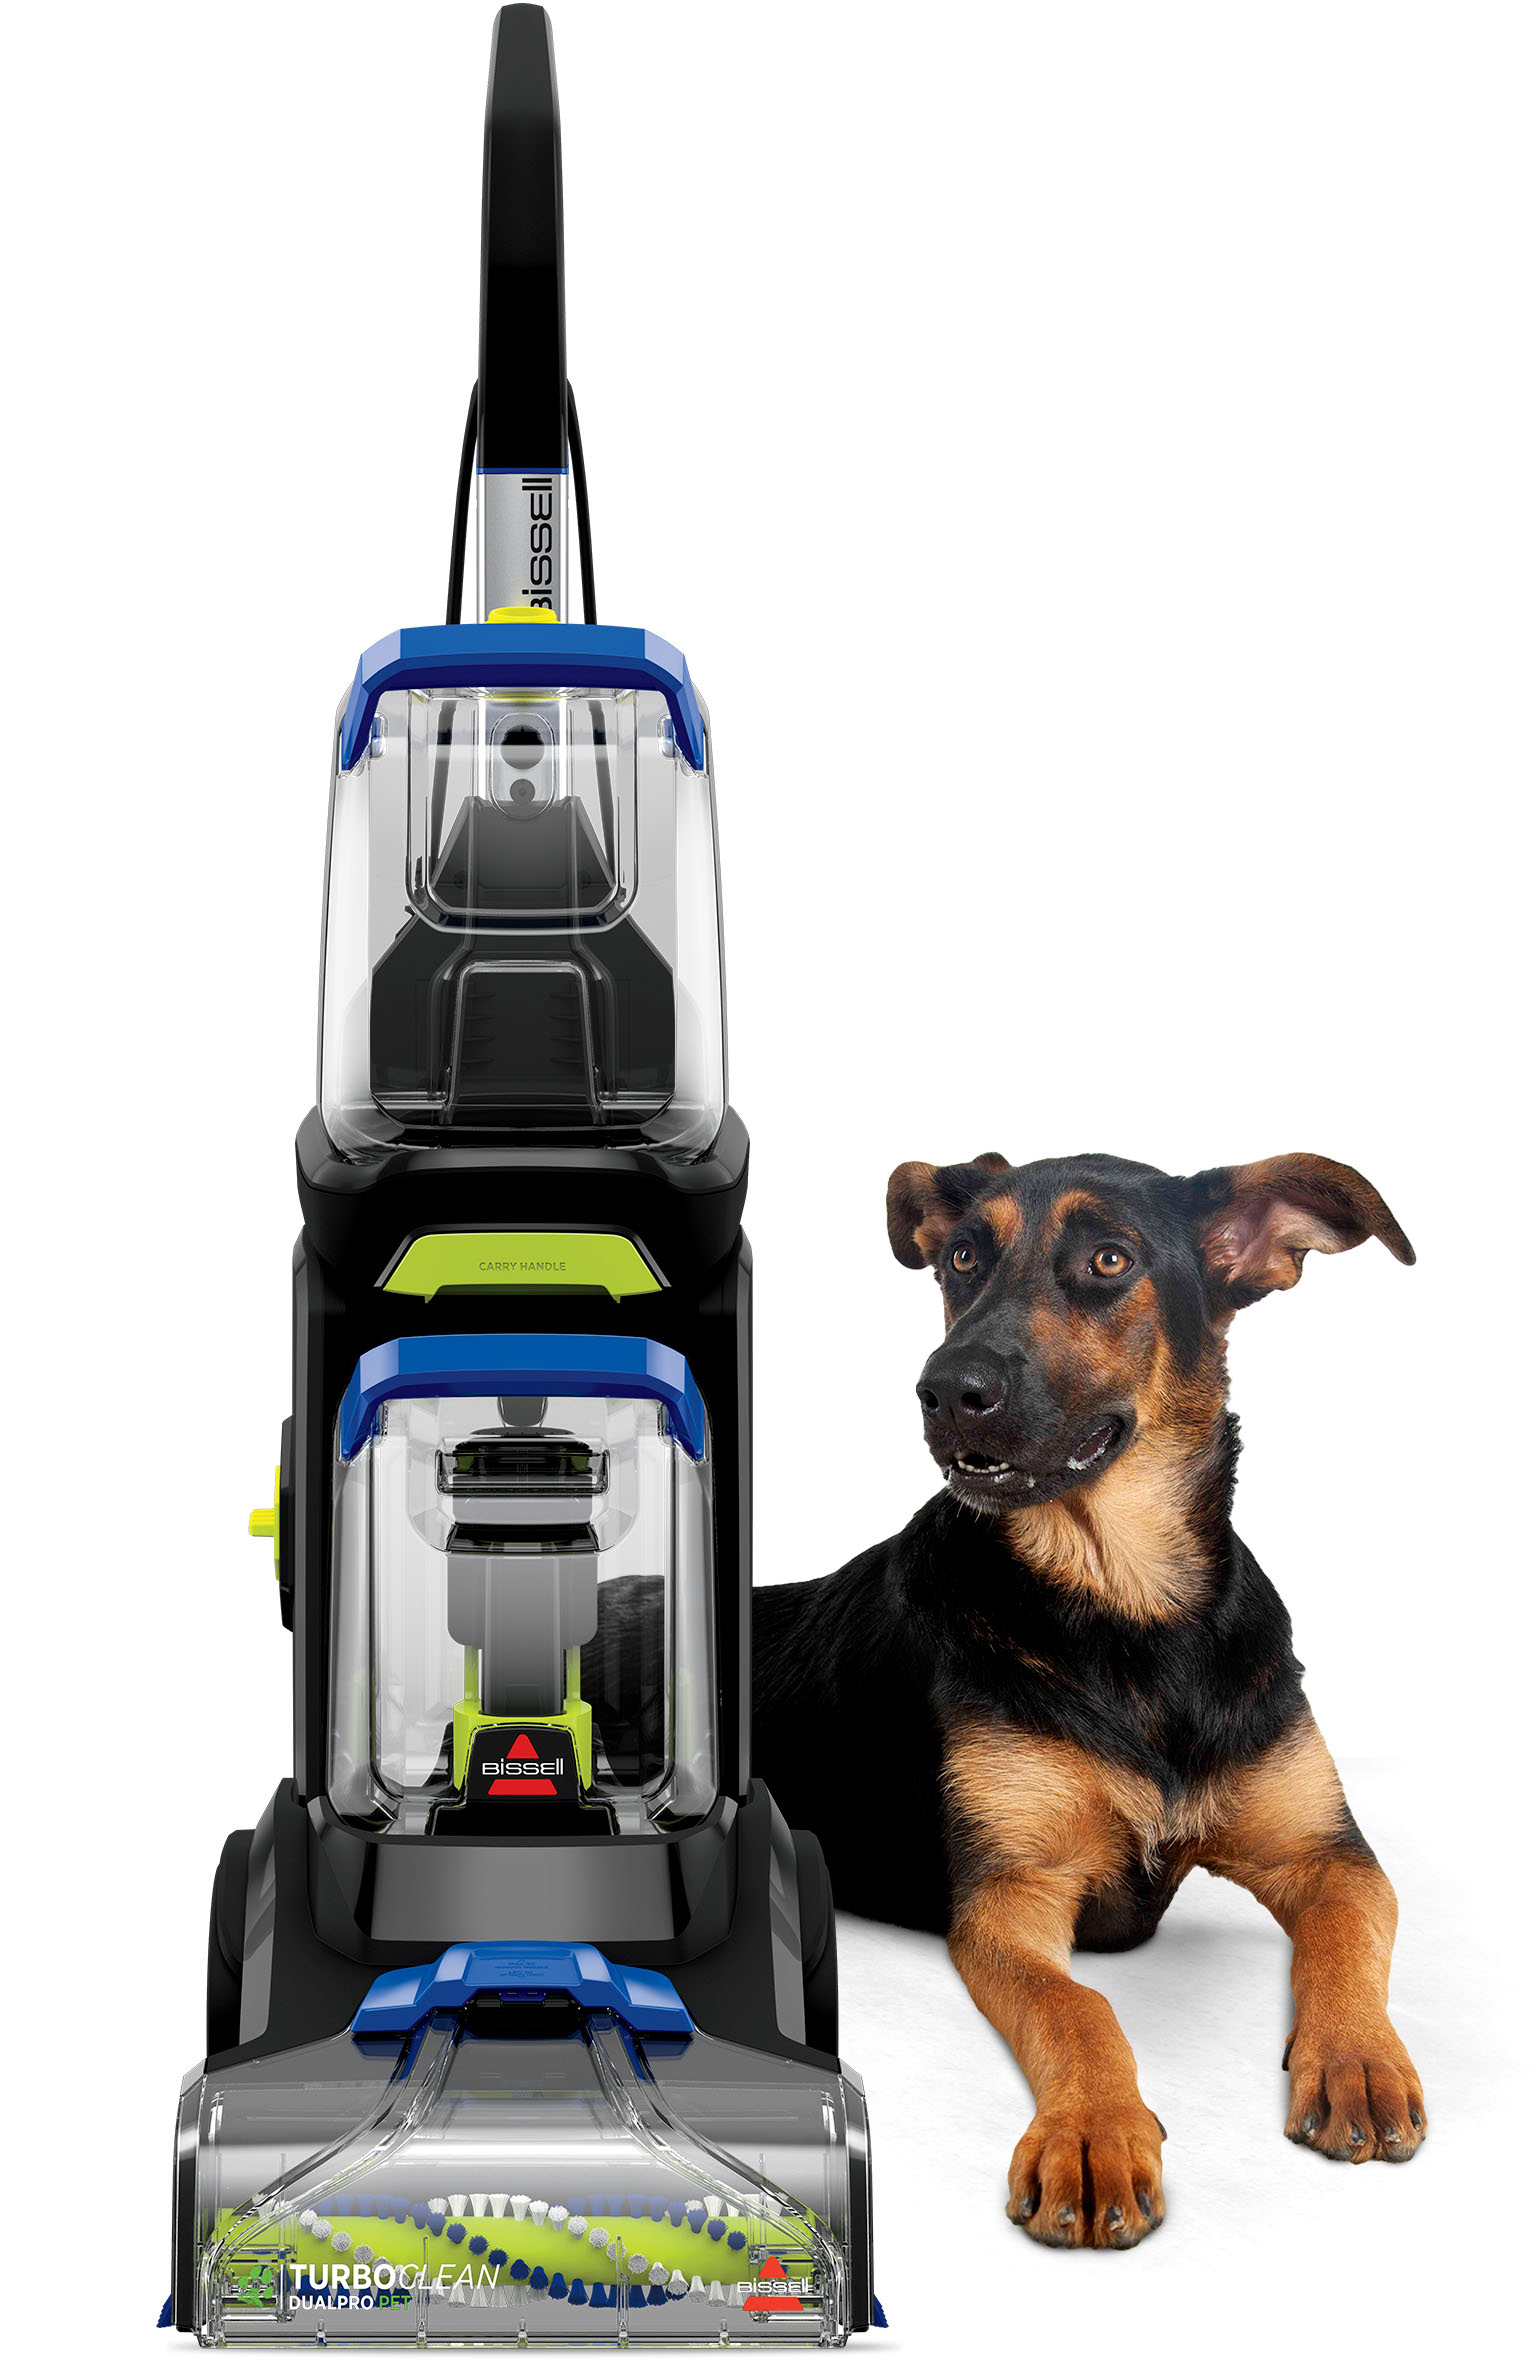 Angle View: BISSELL - TurboClean DualPro Pet Carpet Cleaner (3067) - Cobalt Blue